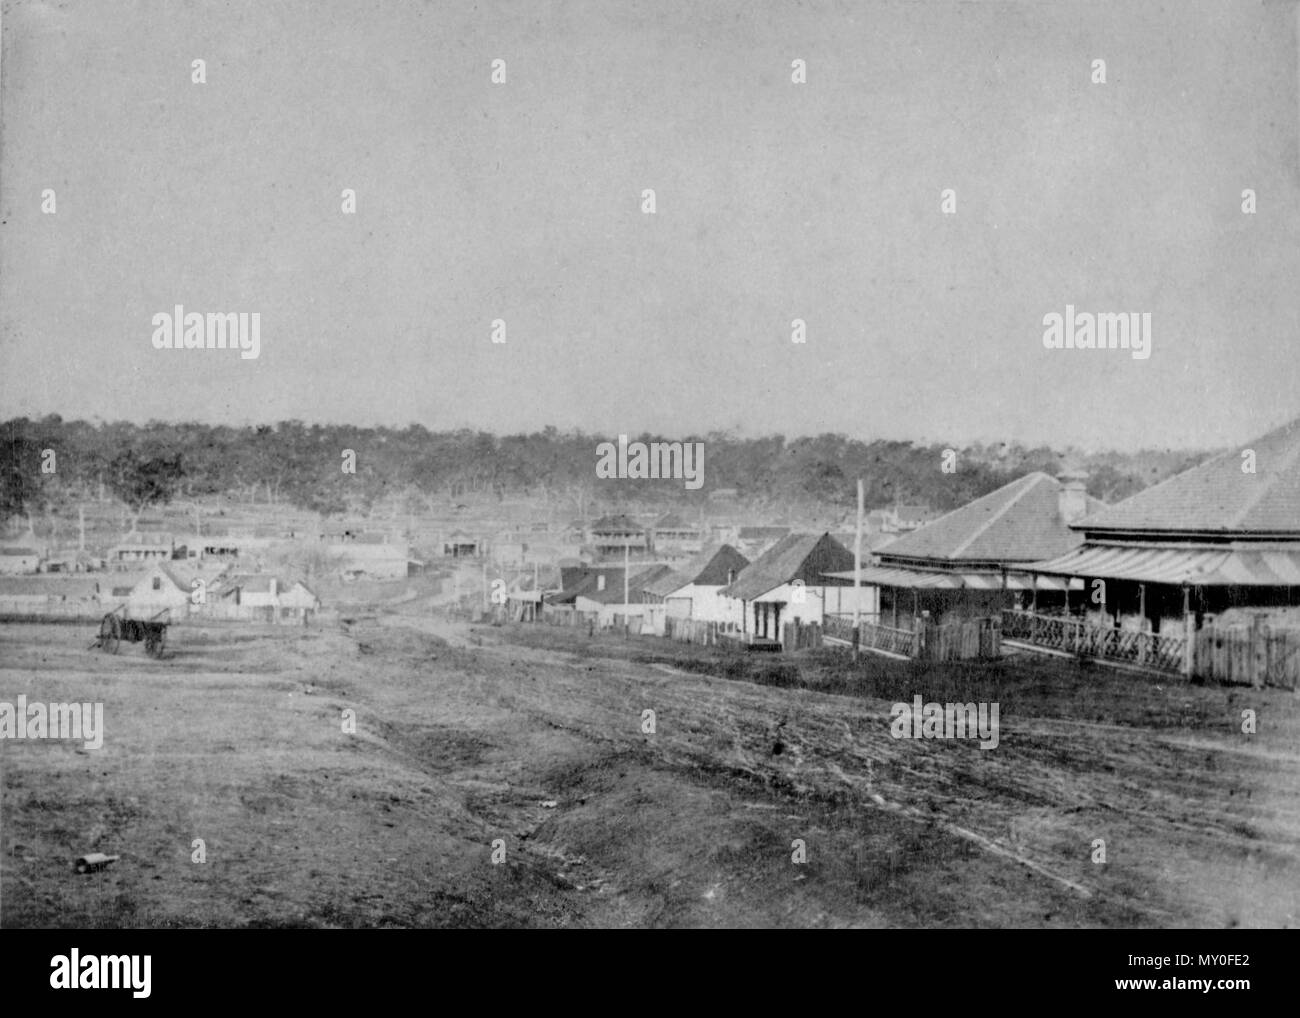 Toowoomba at the time of the opening of the railway. Rail in Queensland Rail transport has been very important to the economic development of Queensland.  The first section of railway opened between Ipswich and Bigge's Camp on 31 July 1865. A railway gauge of 3 feet 6 inches was chosen. This was one of the earliest uses of such a narrow gauge for a public railway. It was cheaper to build and the government had little financial resources.  The railways in Qu Stock Photo